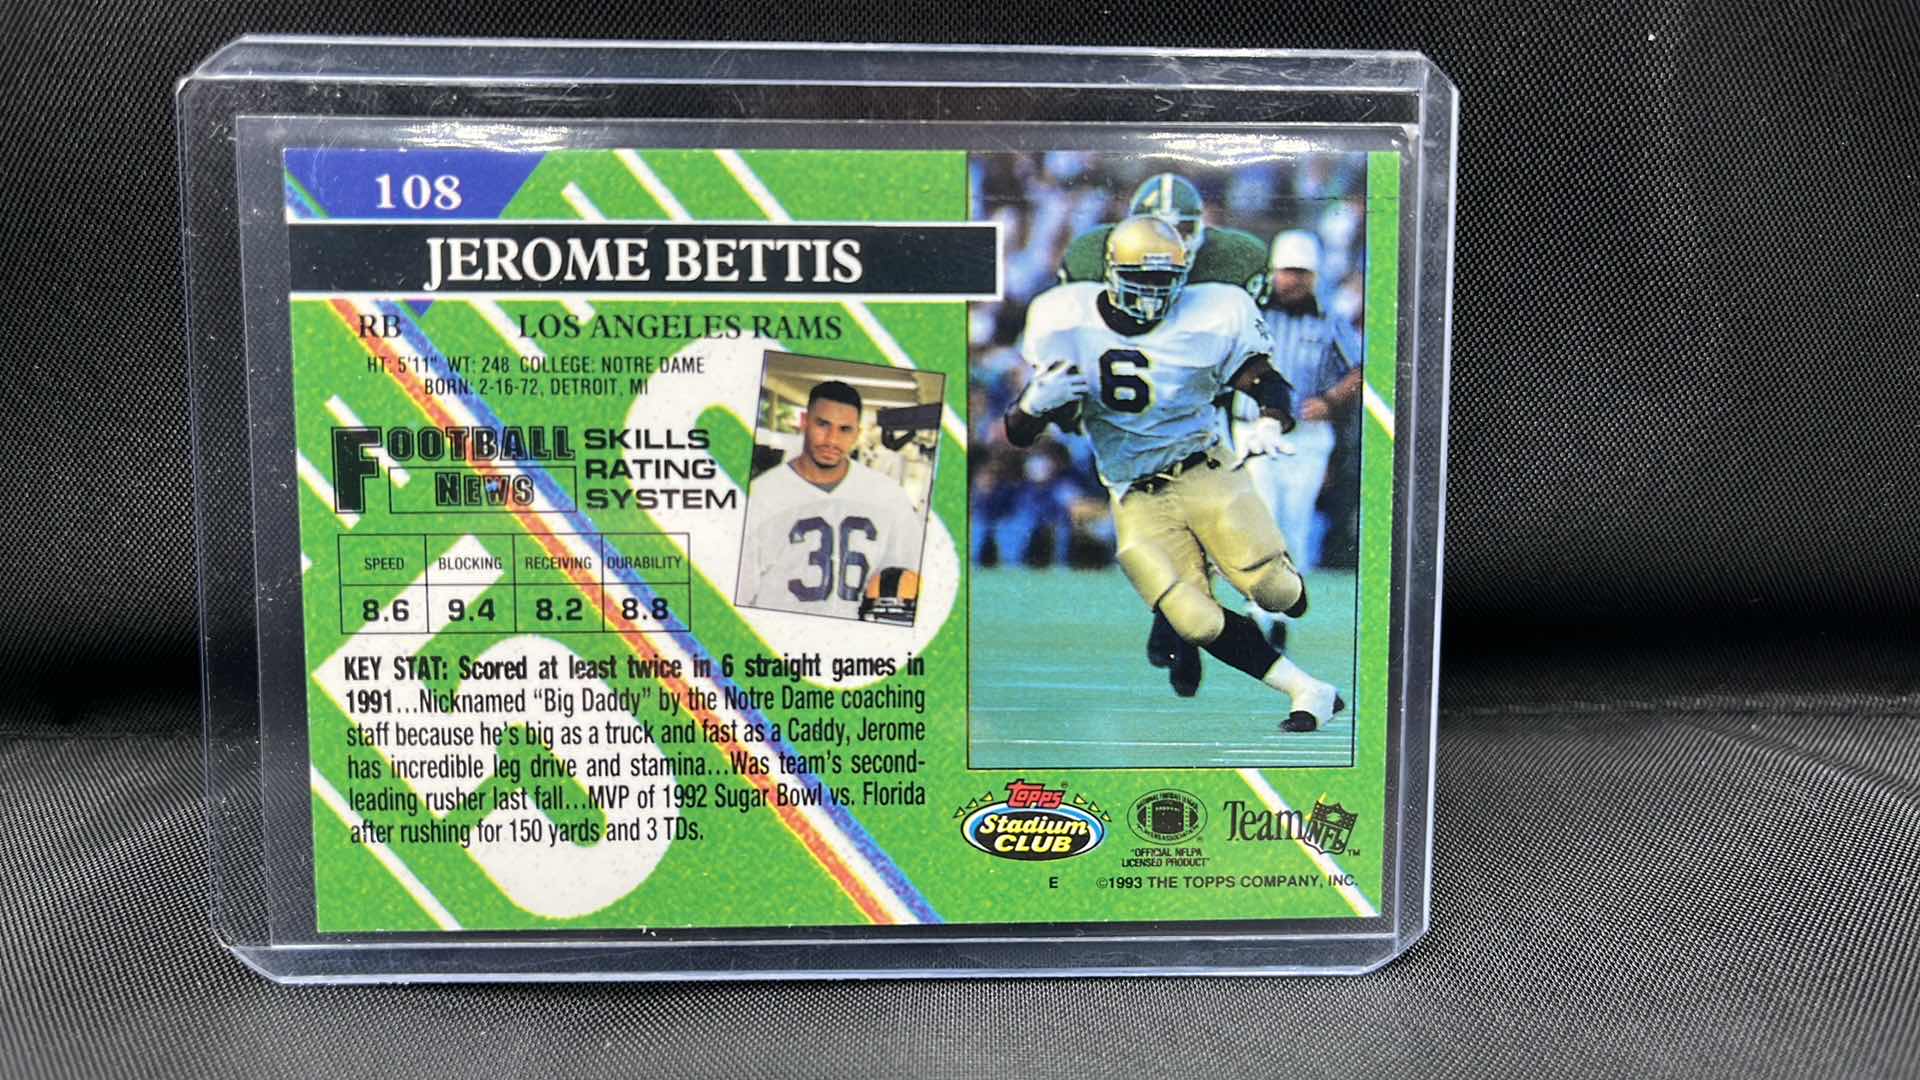 Photo 2 of 1993 TOPPS rookie Jerome Bettis 108